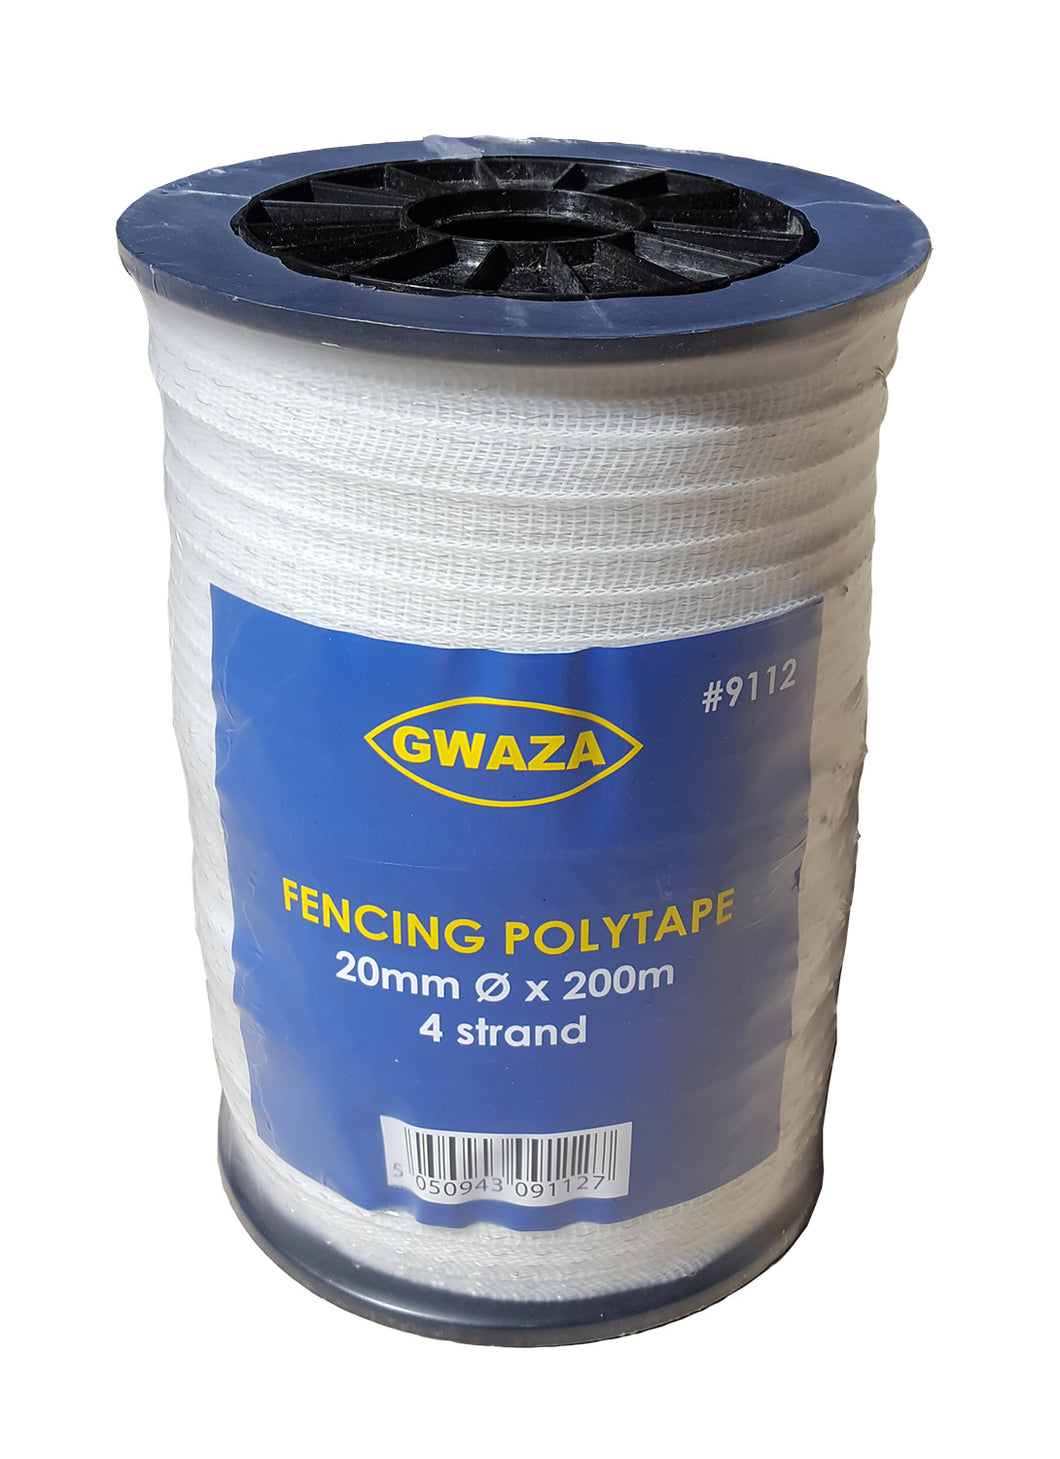 Electric Fencing Poly Tape 4 Strand 20mm - 200m